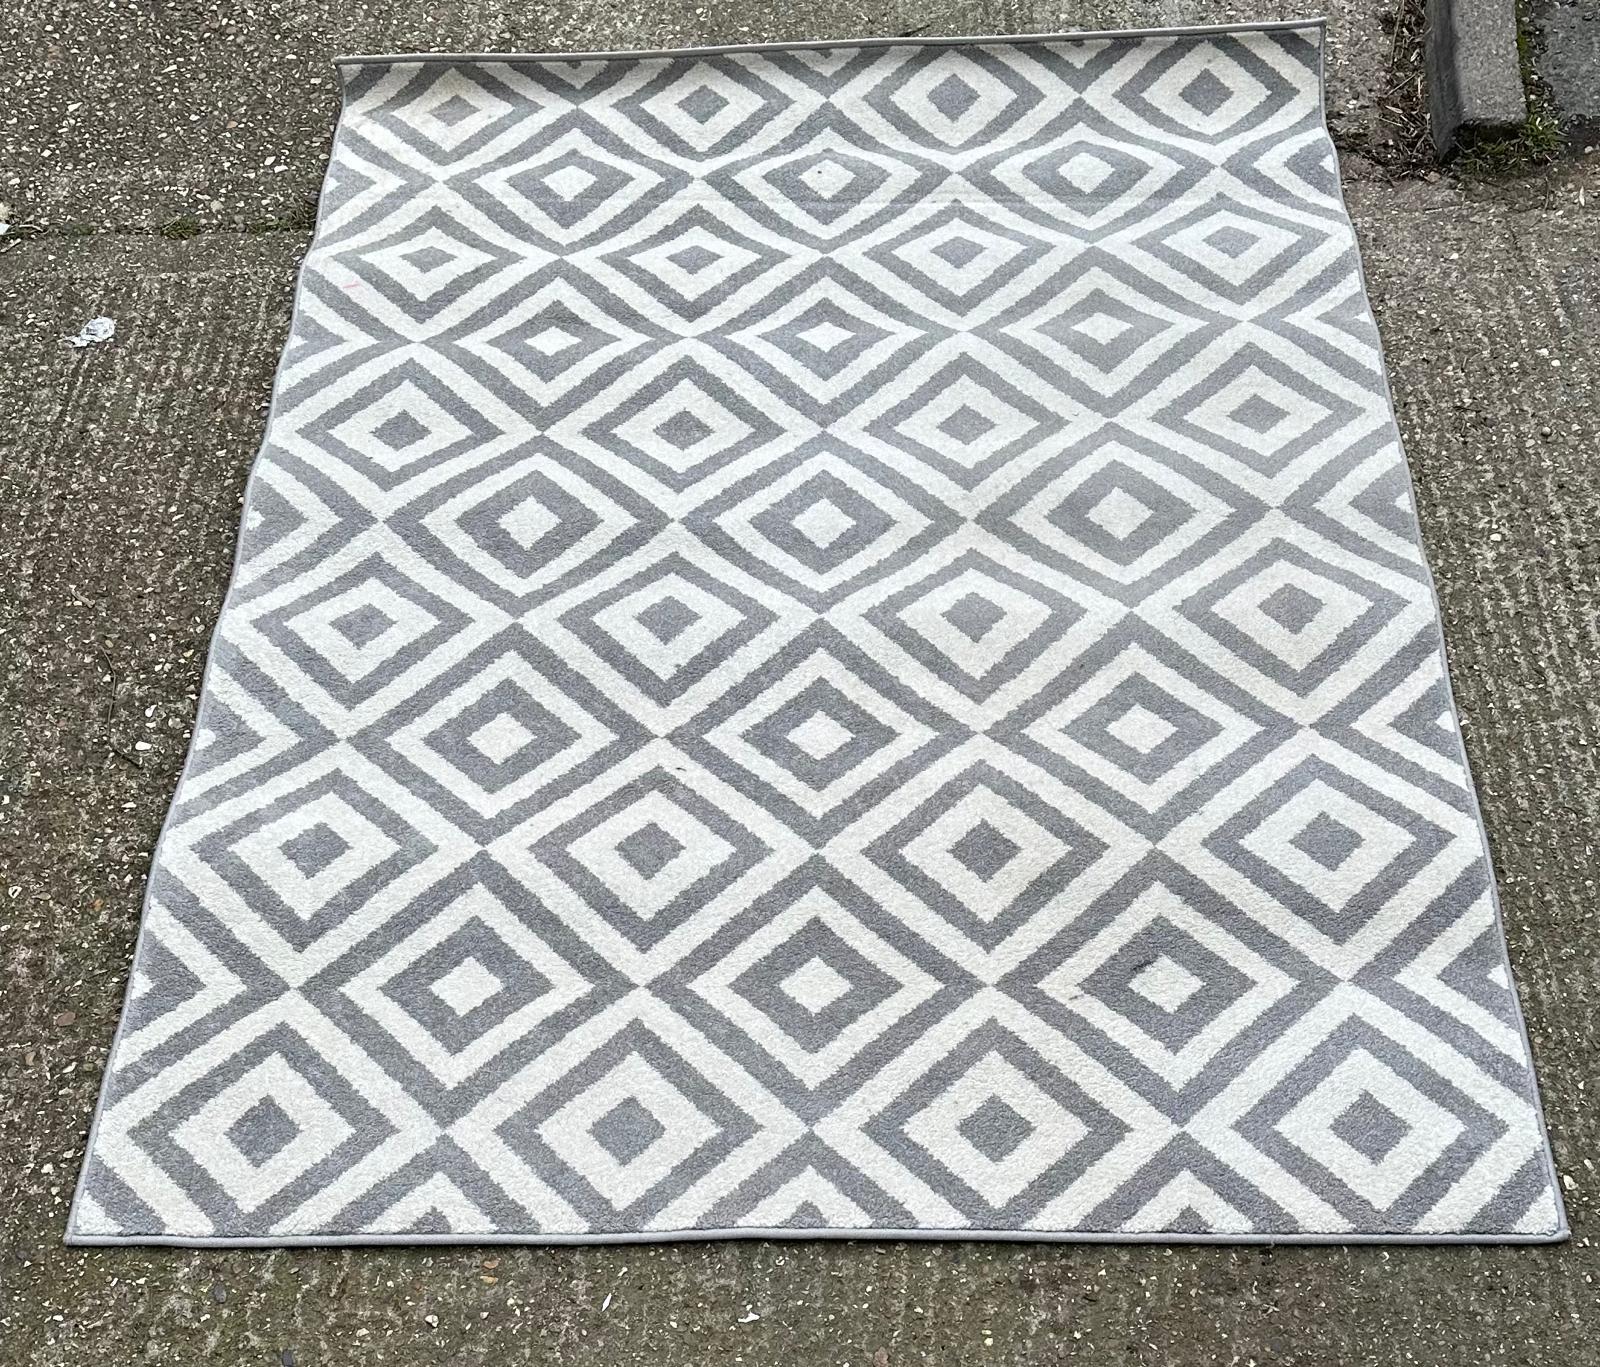 A contemporary rug in a grey and white geometric pattern 160cm x 220cm